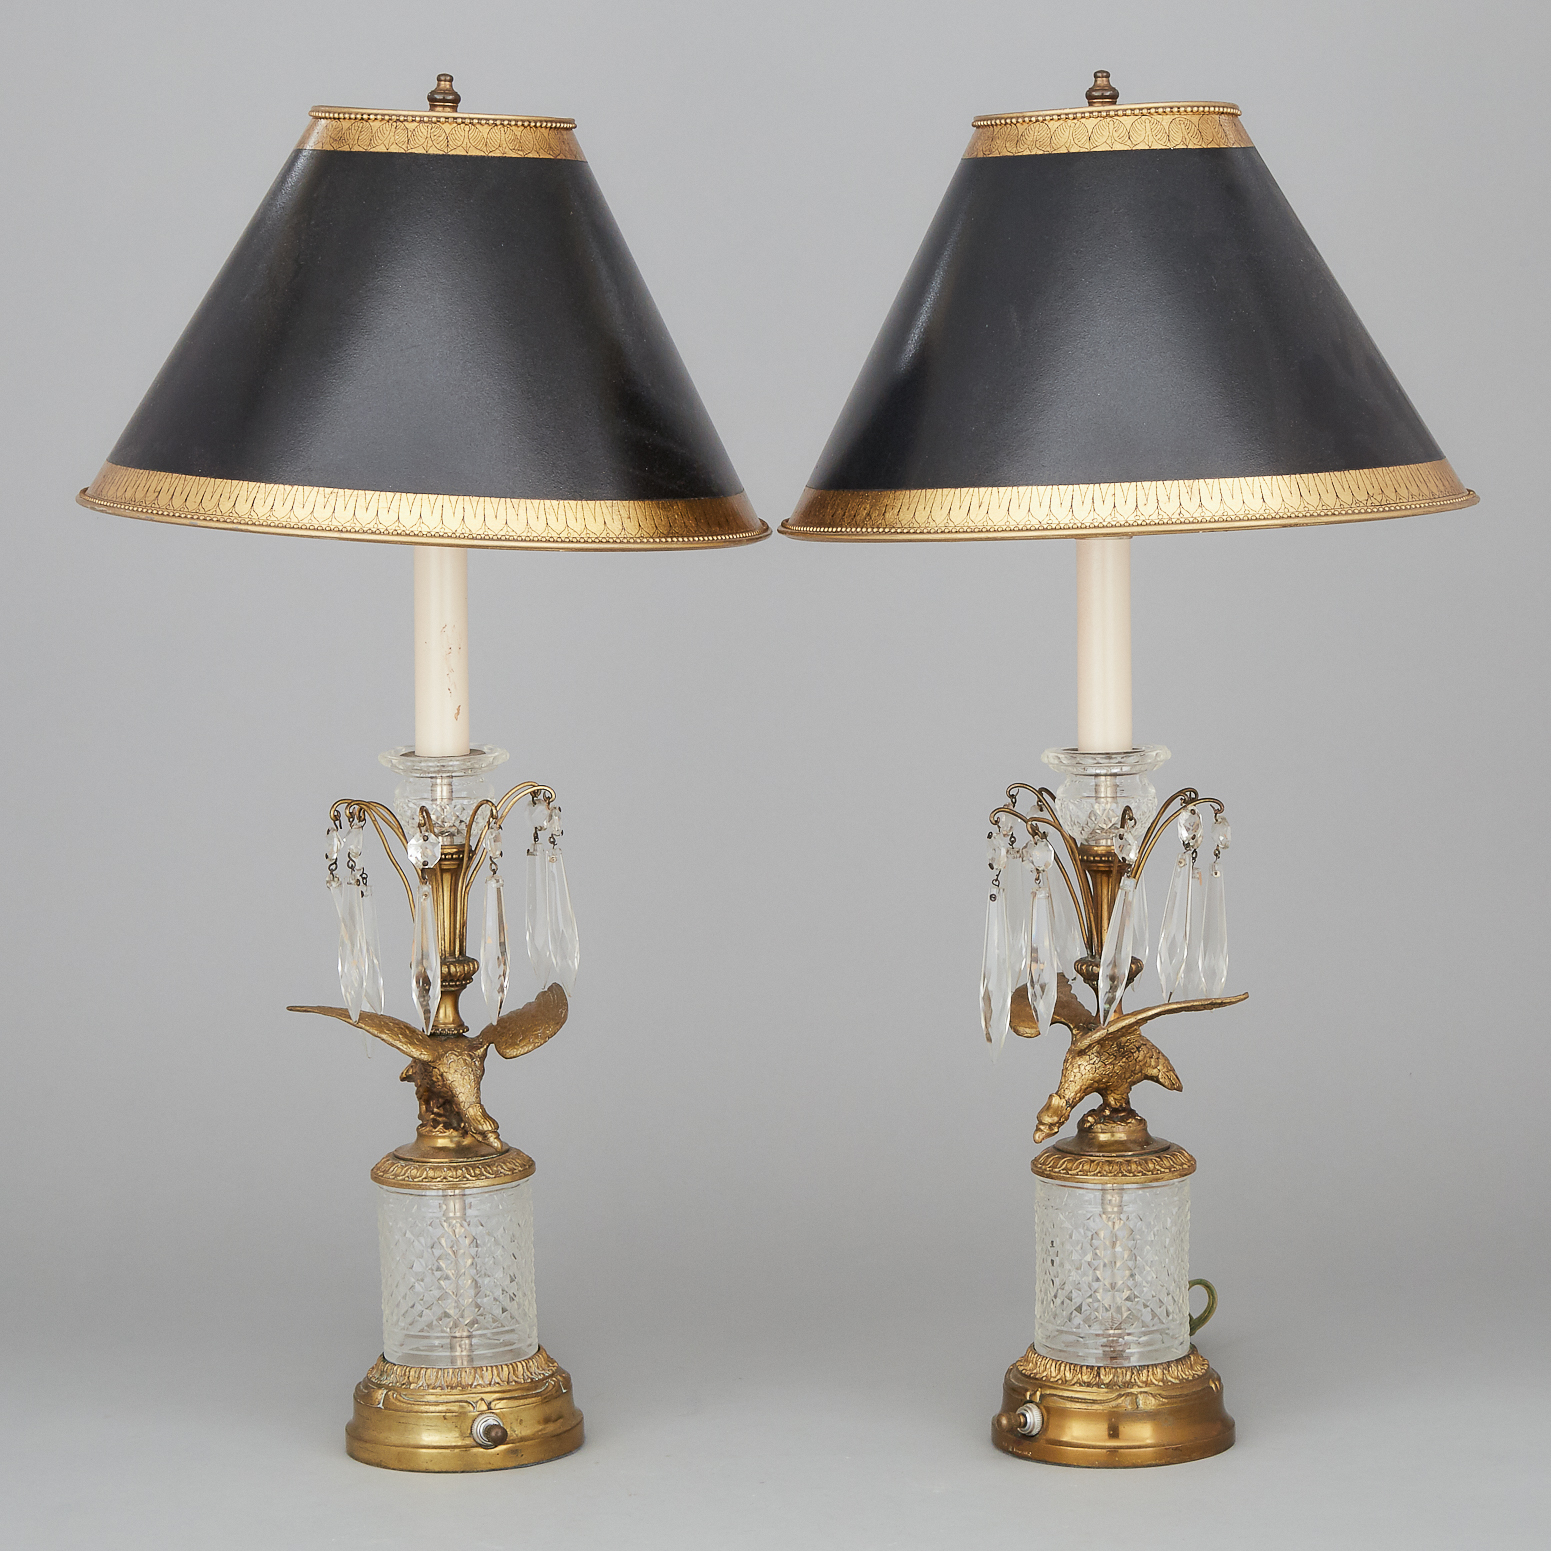 Pair of Austrian Cut Glass Mounted Ormolu Candlestick Lamps, mid 20th century